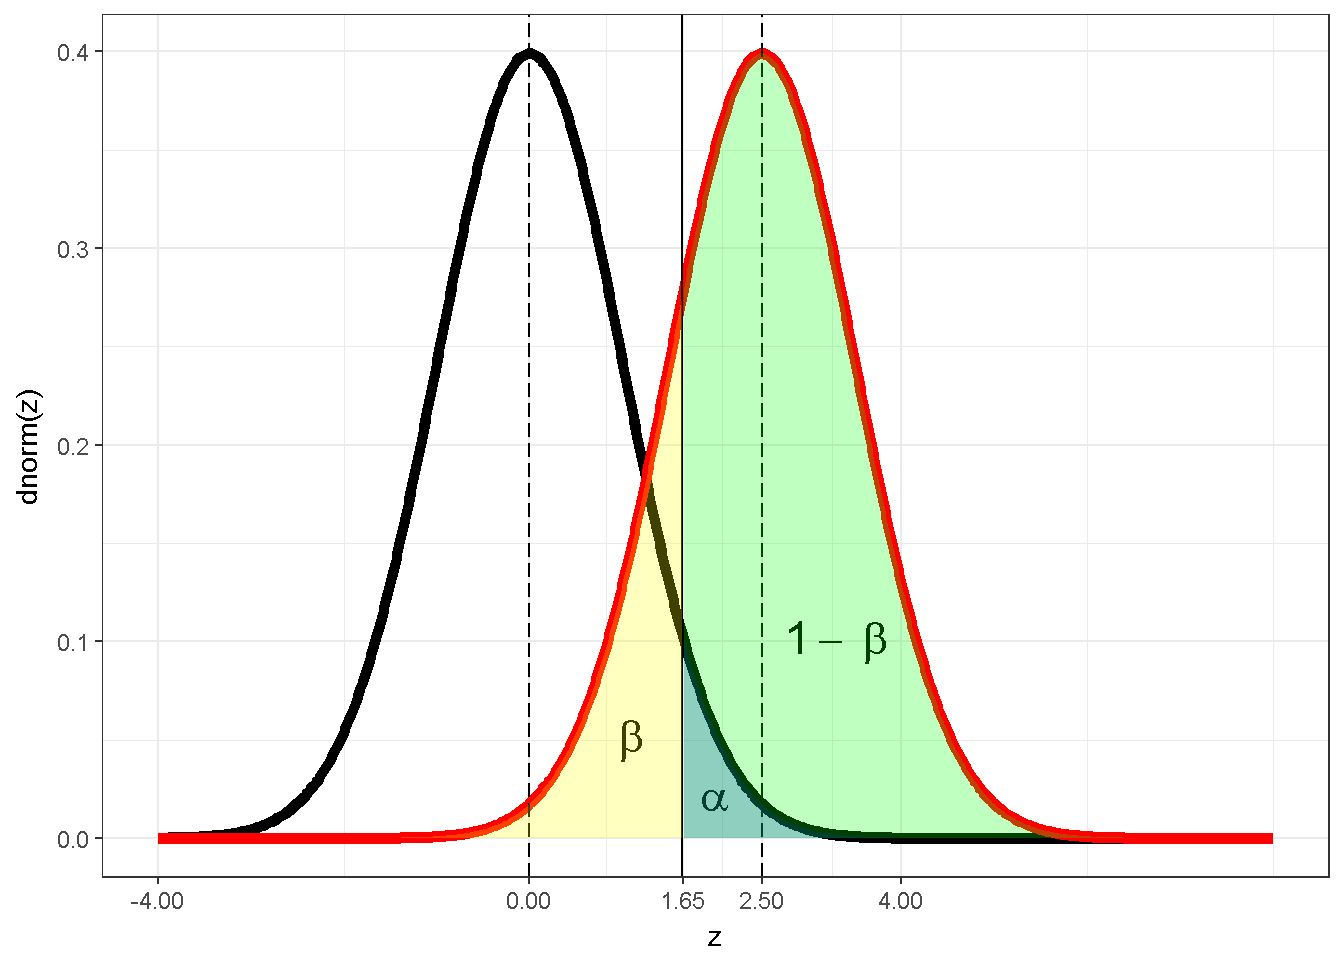 Power illustration with z distribution